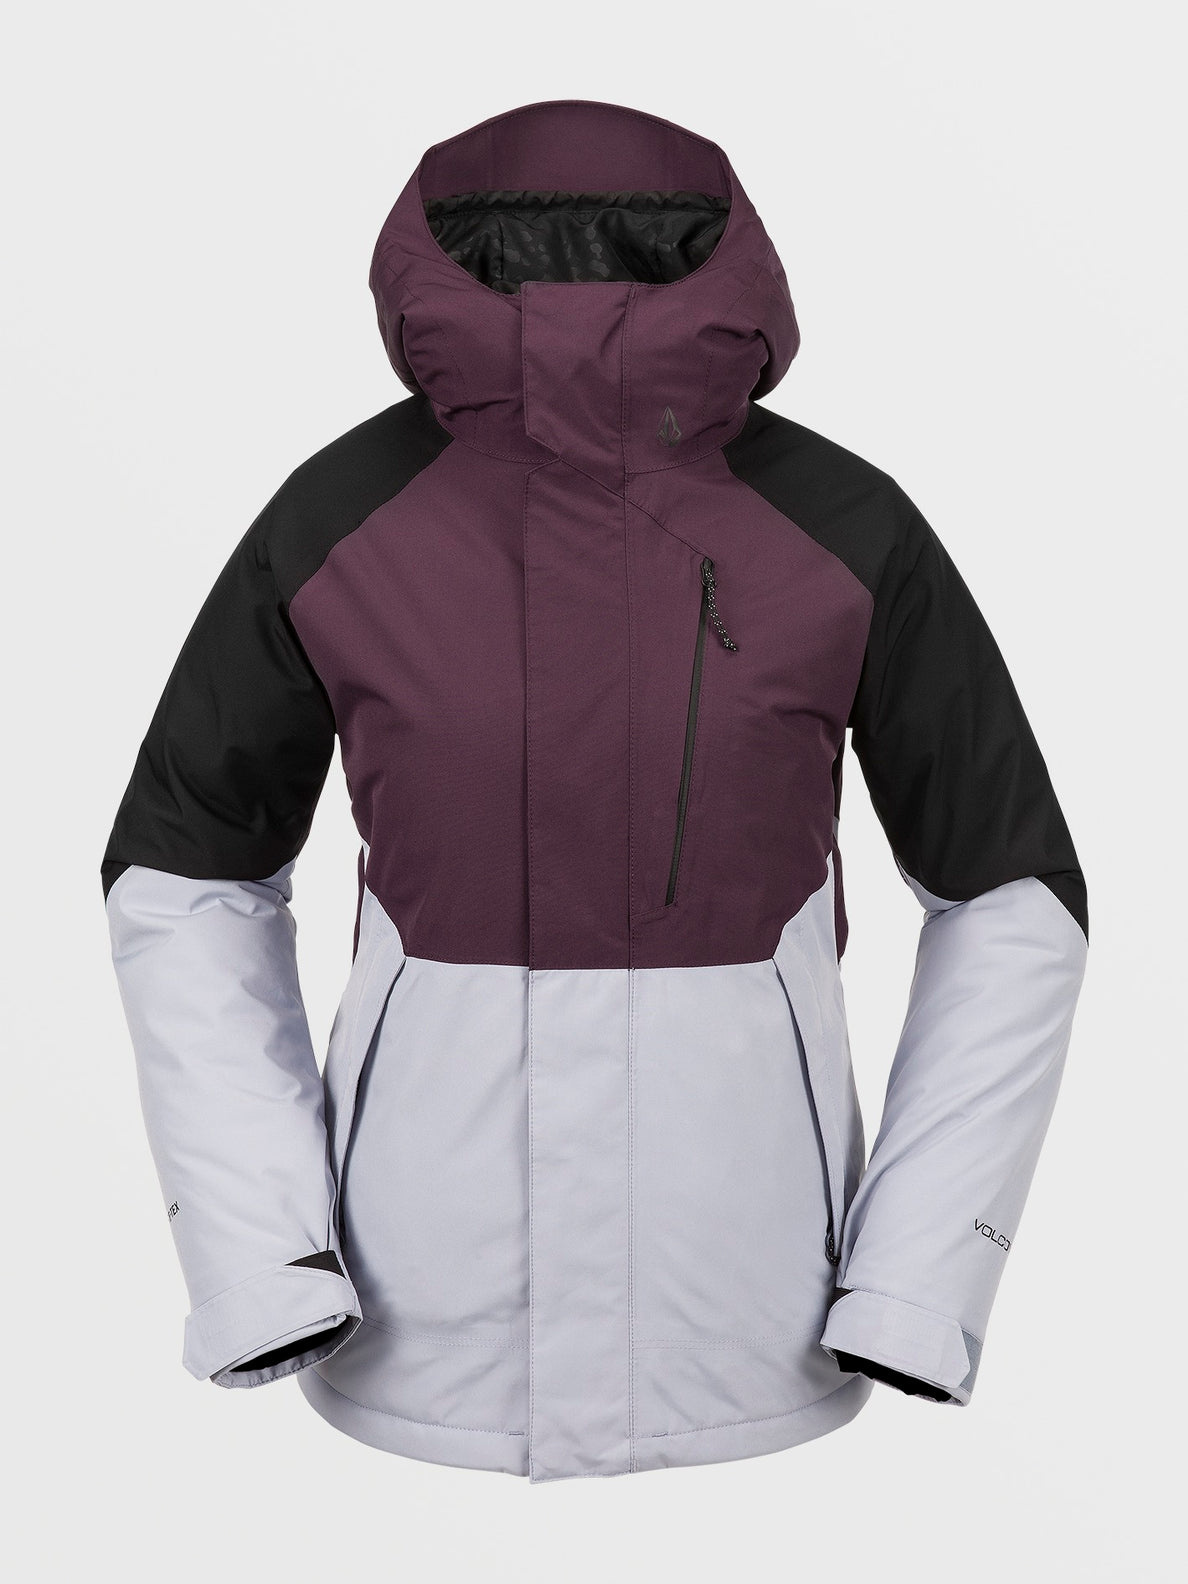 VCo Aris Insulated Gore Jacket / Blackberry - Medicine Hat-The Boarding  House